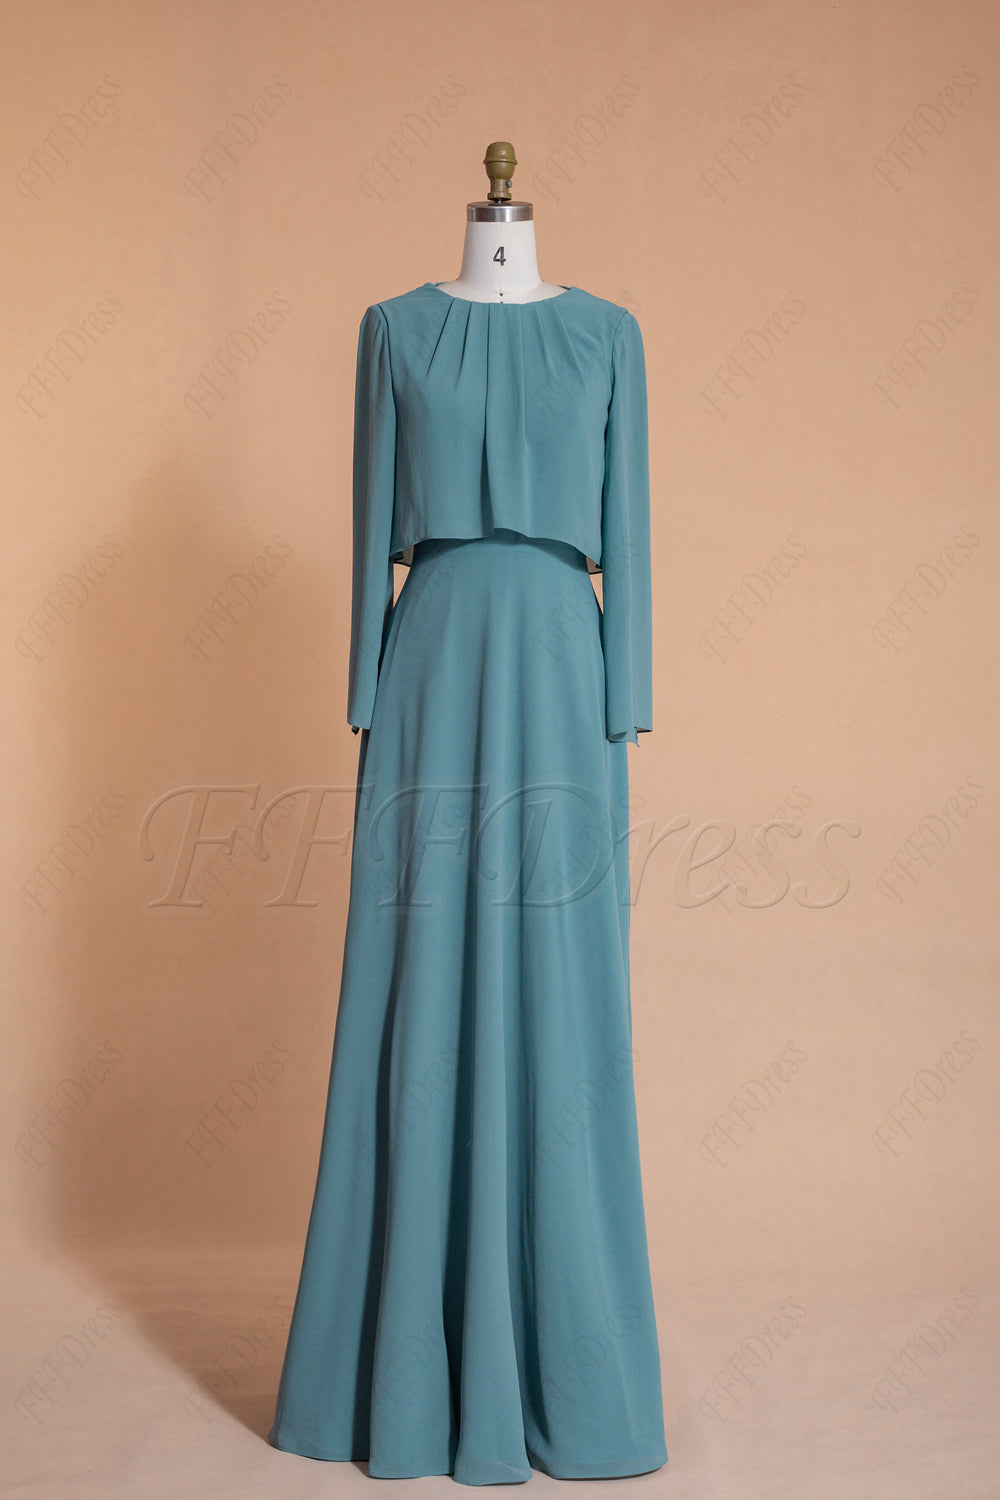 Modest Sea glass green bridesmaid dresses with long sleeves